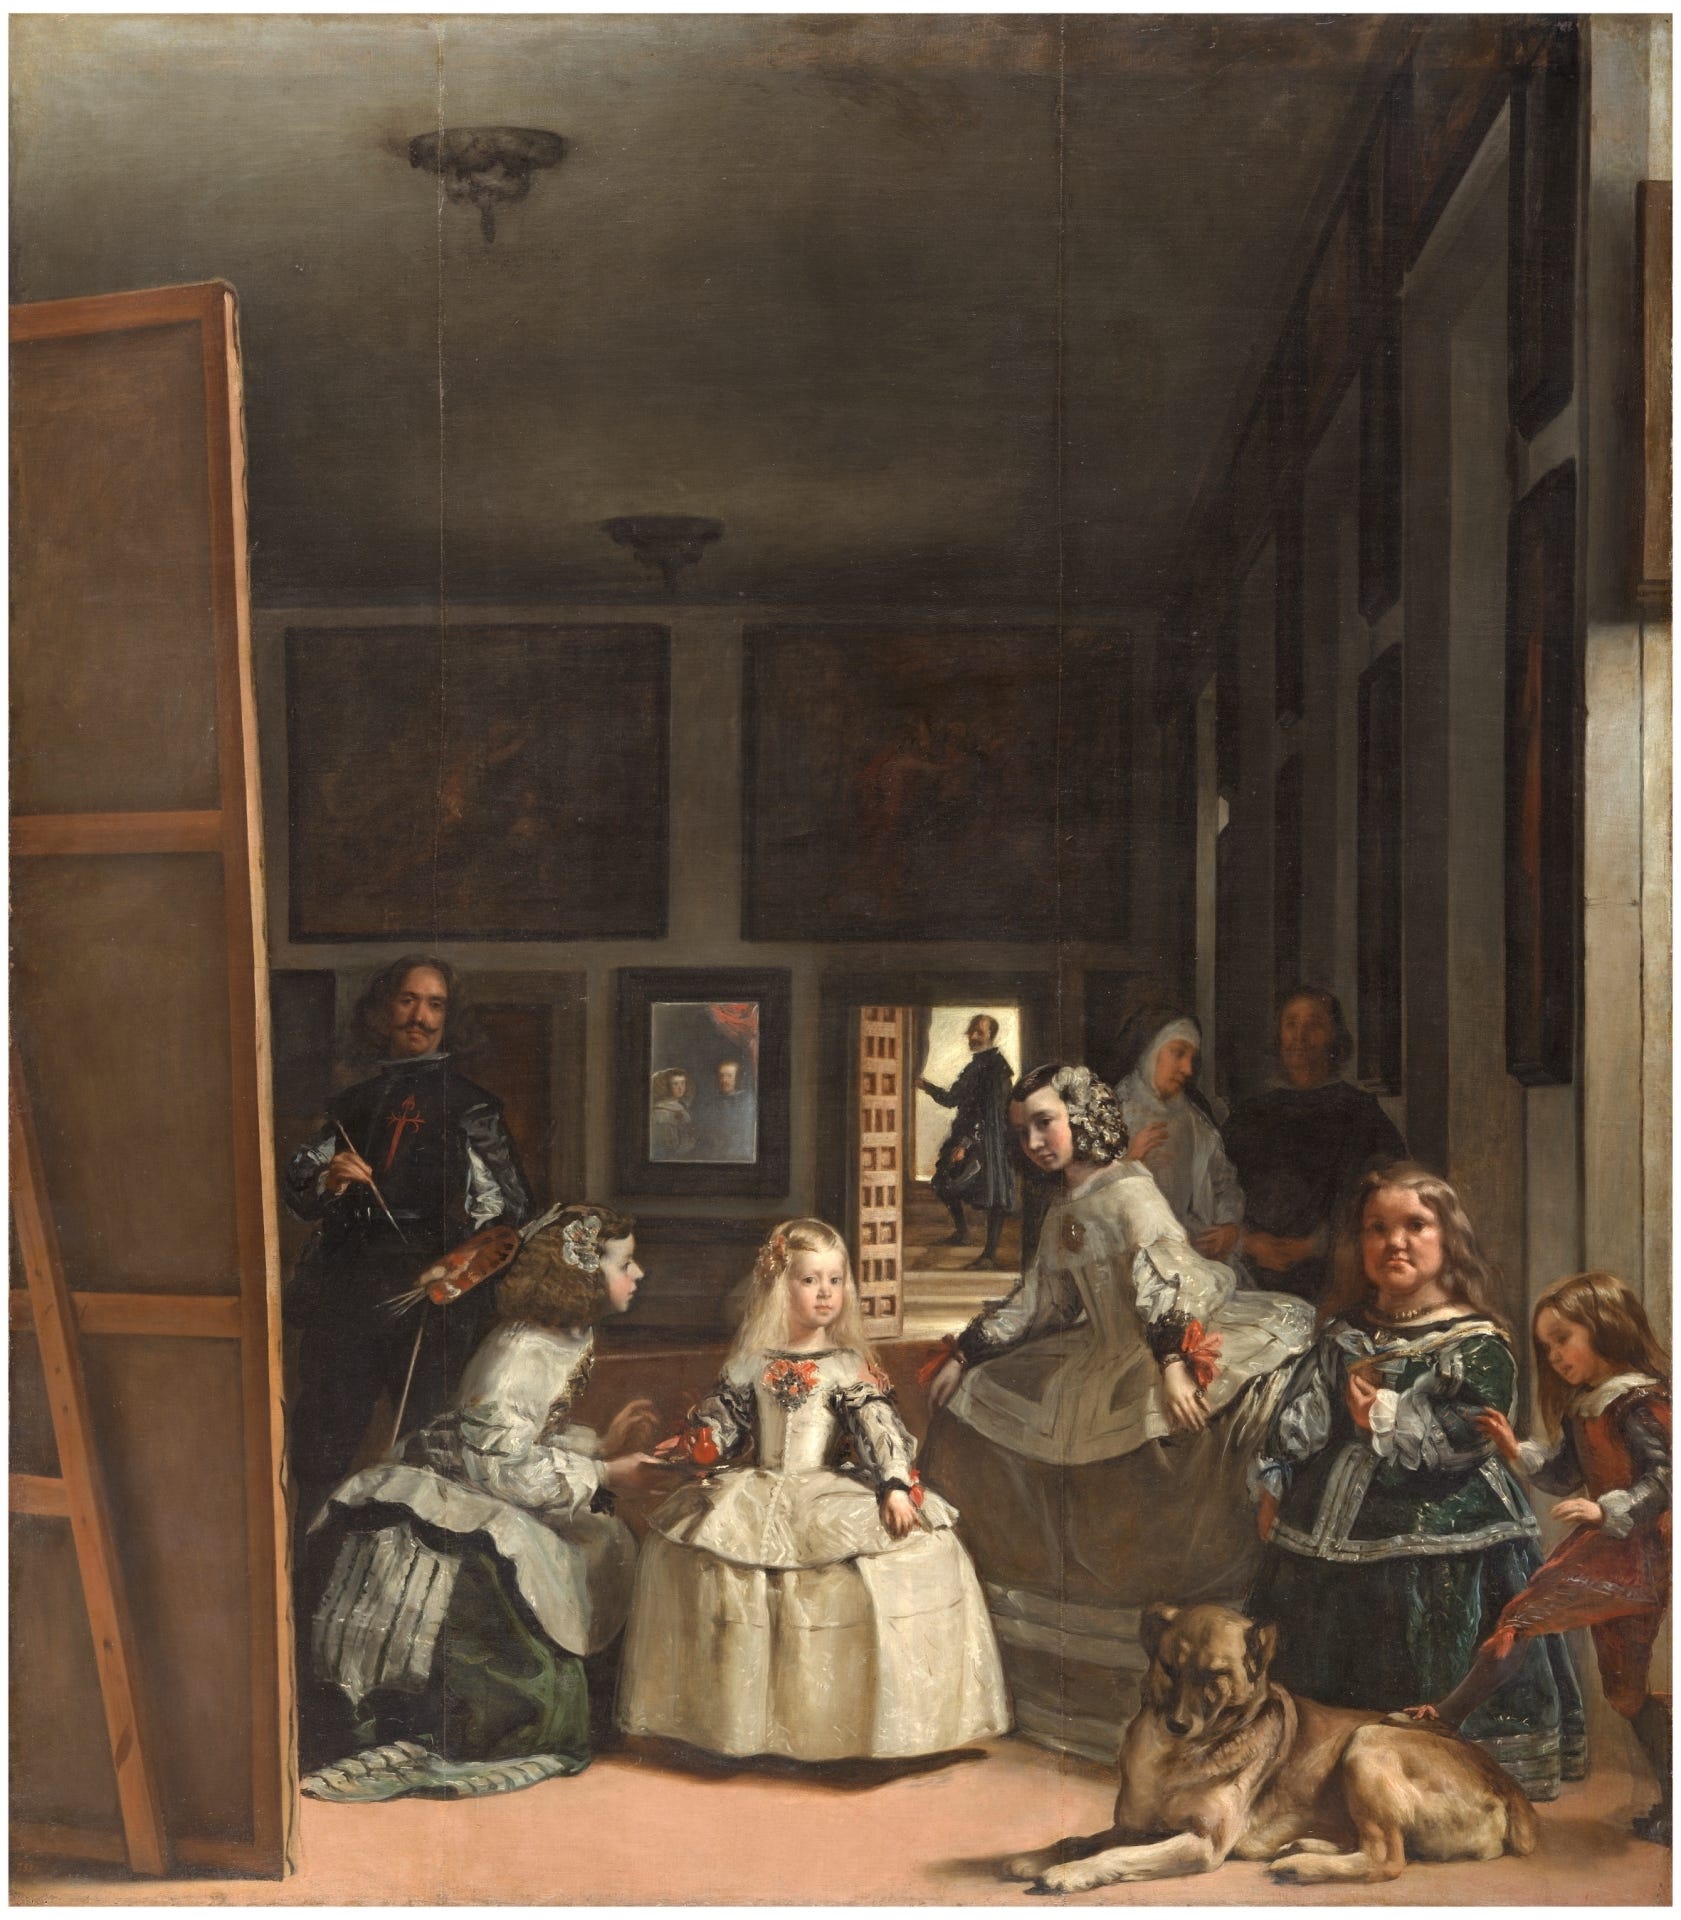 Diego Velázquez was more than just about 'Las Meninas', by Shankar  Chaudhuri